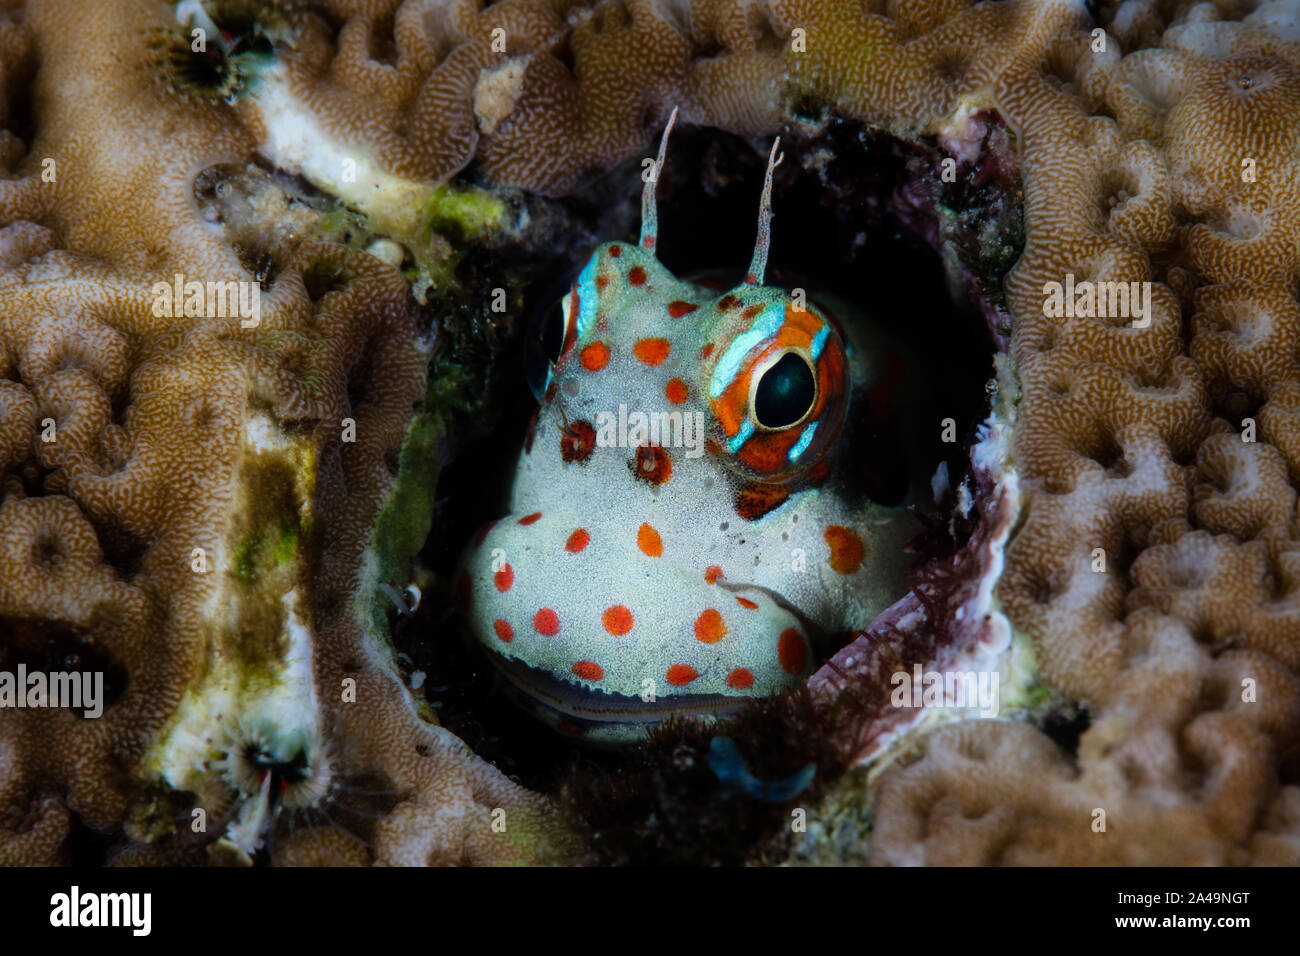 A cute Red-spotted blenny, Blenniella chrysospilos, looks out from its protective home on a healthy coral reef in the Banda Sea of eastern Indonesia. Stock Photo